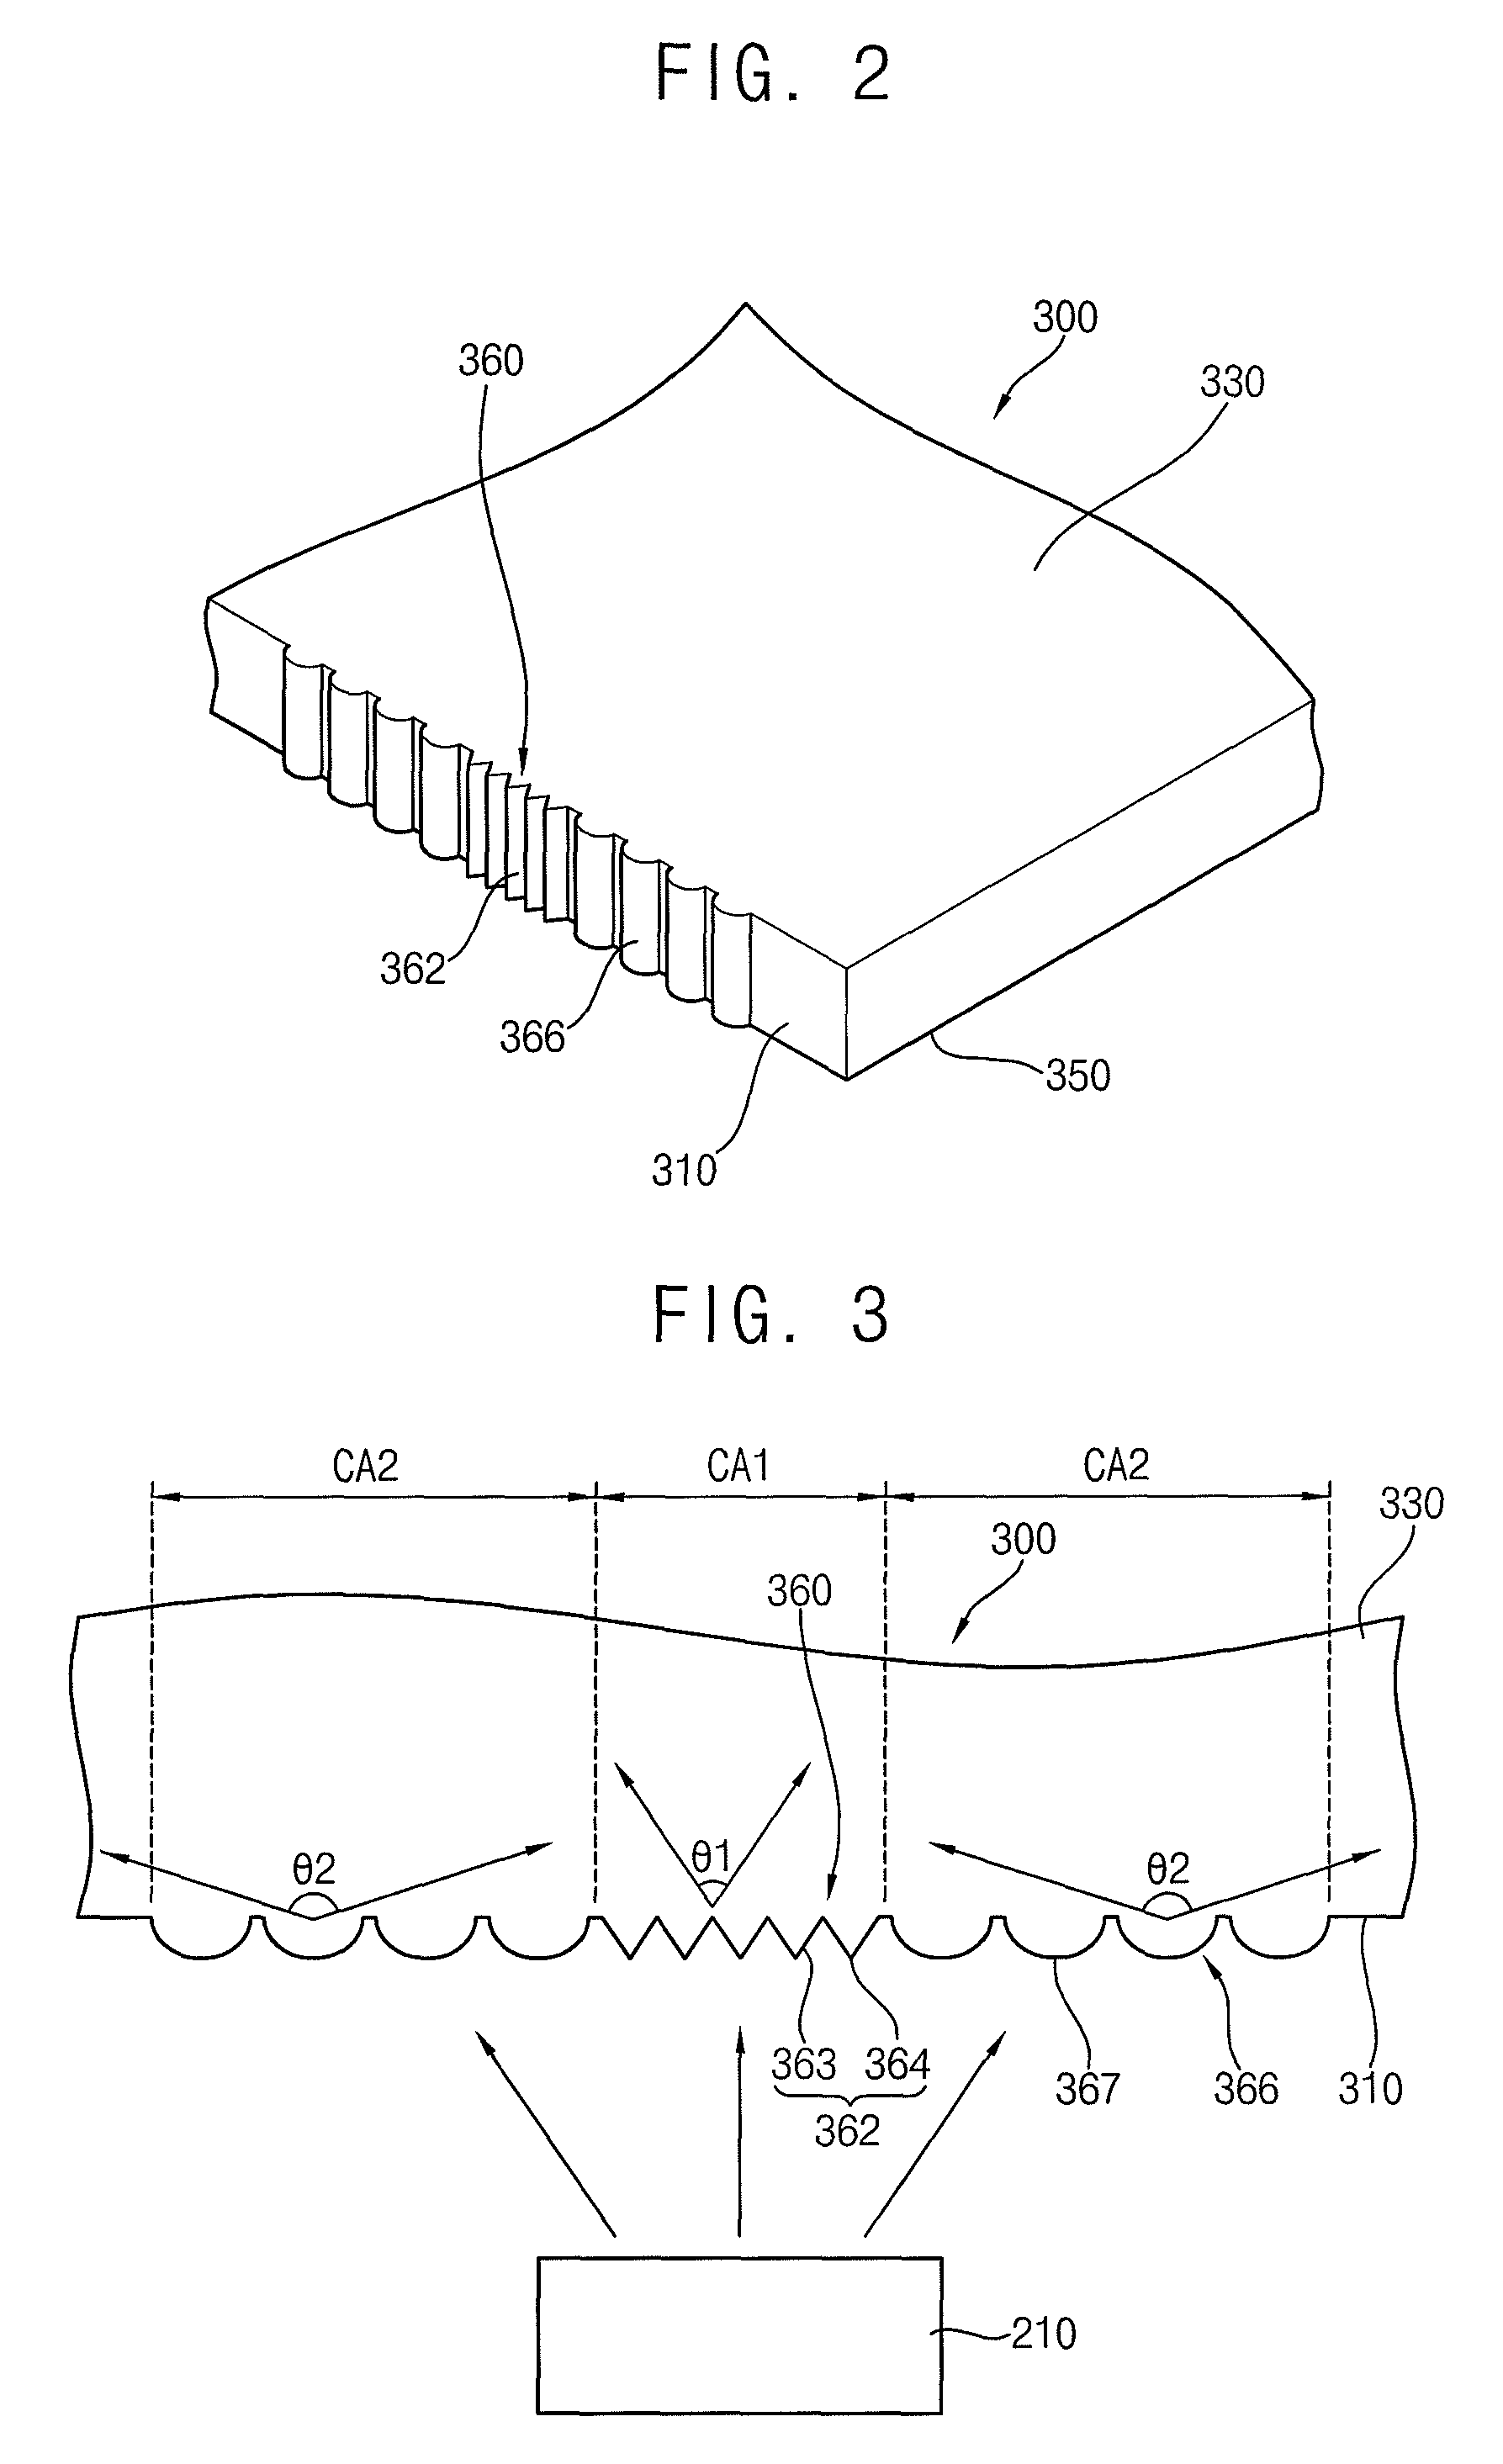 Display apparatus and backlight assembly having a light guide plate comprising first and second light control patterns